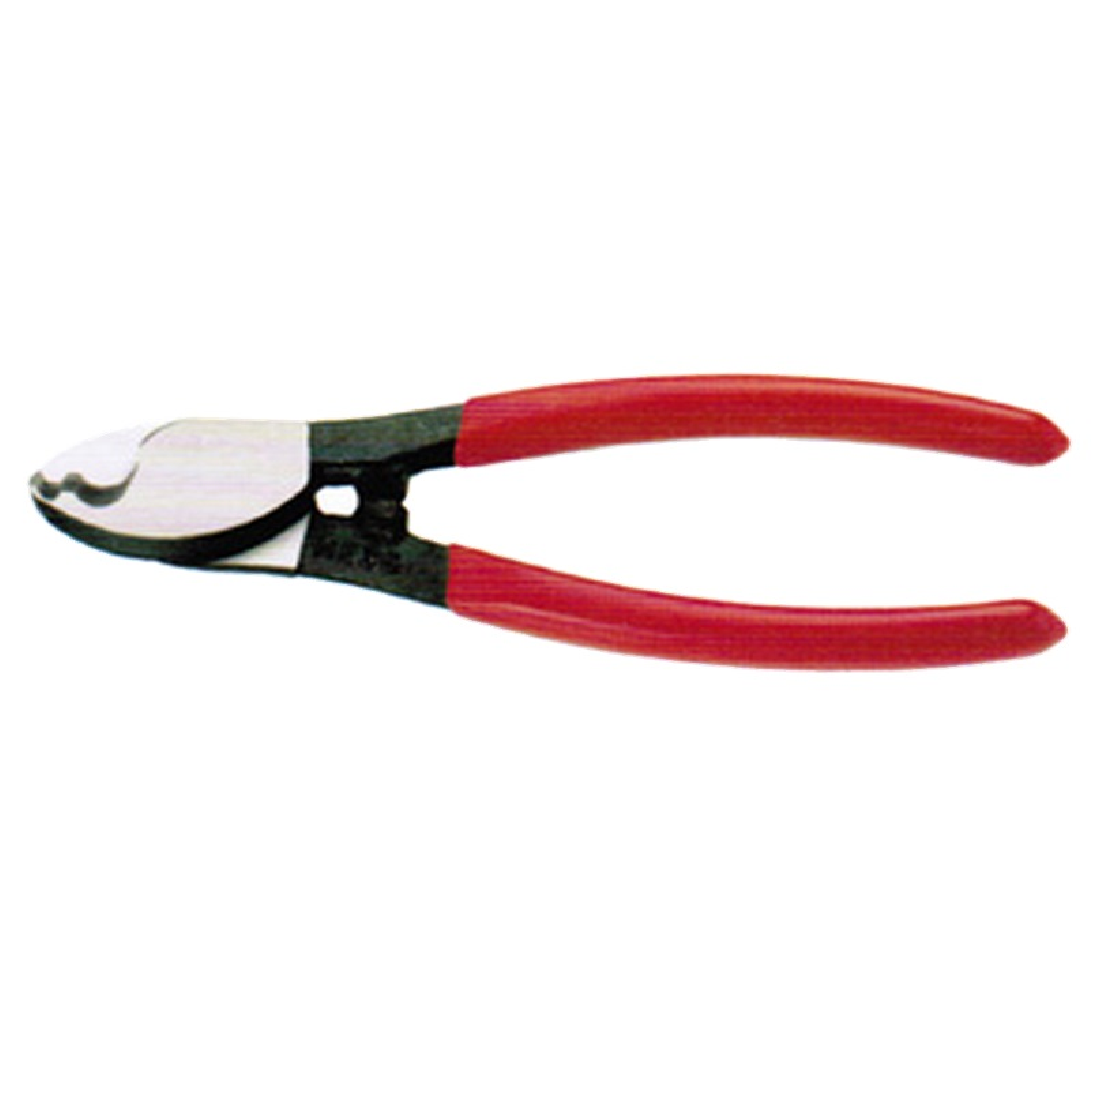 RONG YUNN RYC-22 Cable Cutter